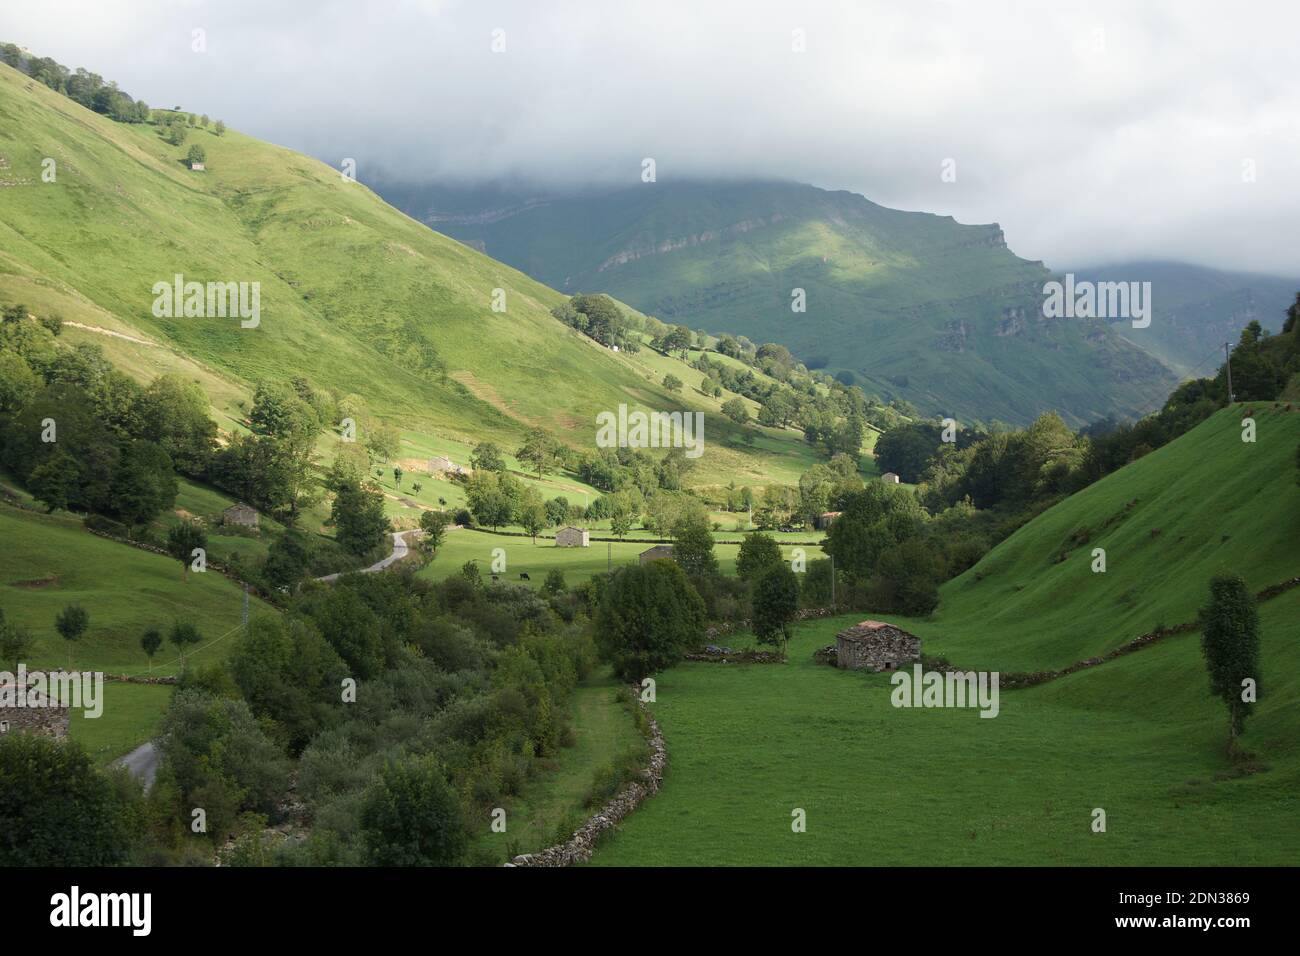 A View From Cantabrian Mountains Stock Photo